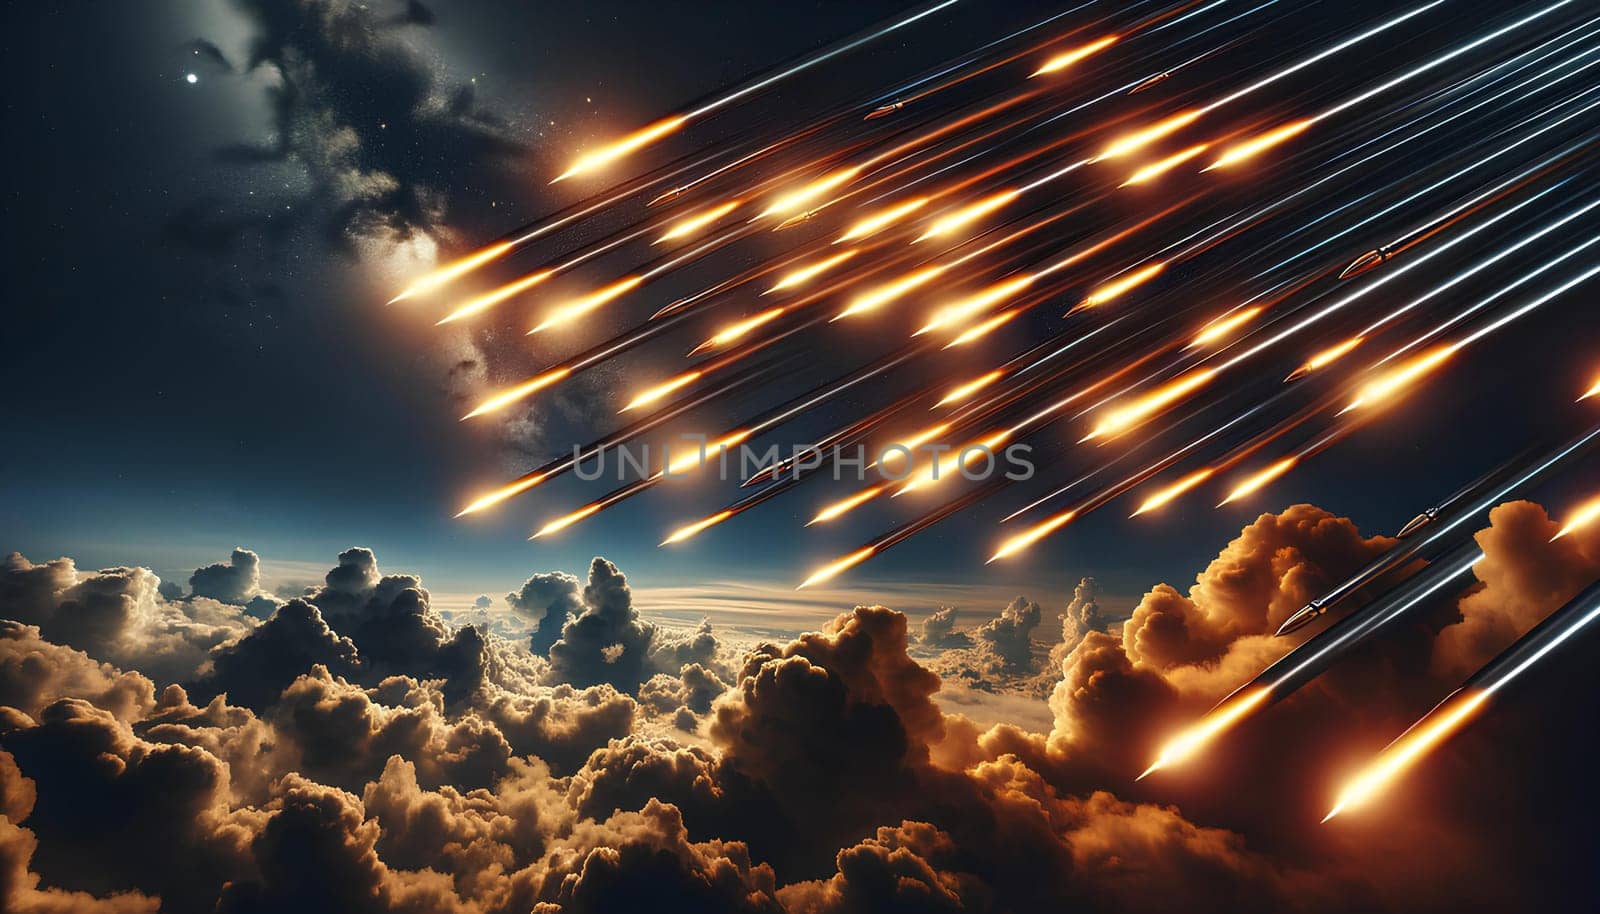 tracer bullets flying into the clouds at night, dark night sky with clouds illuminated by a glowing trail.